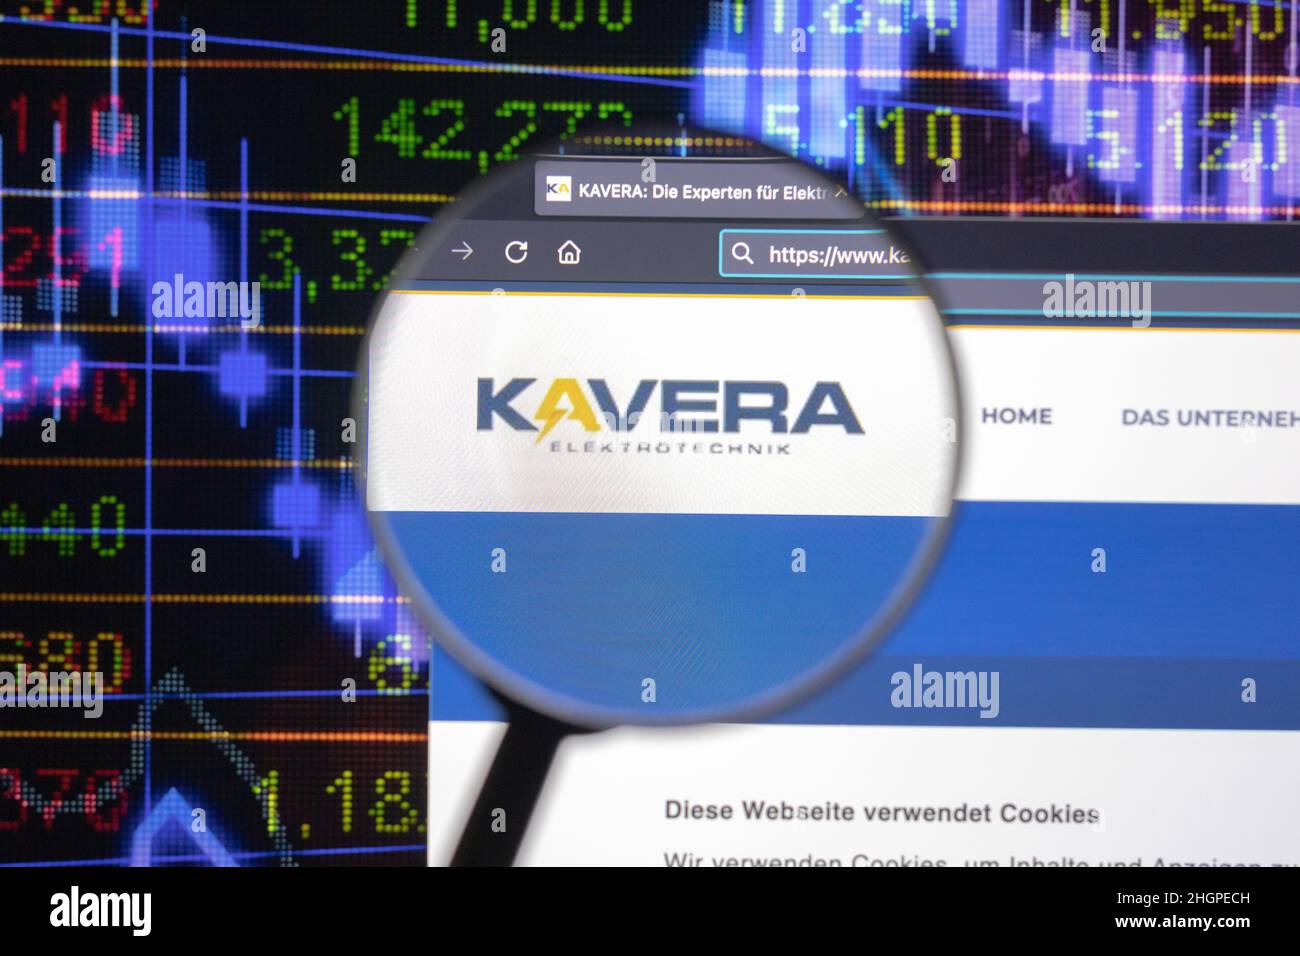 Kavera company logo on a website with blurry stock market developments in the background, seen on a computer screen through a magnifying glass. Stock Photo